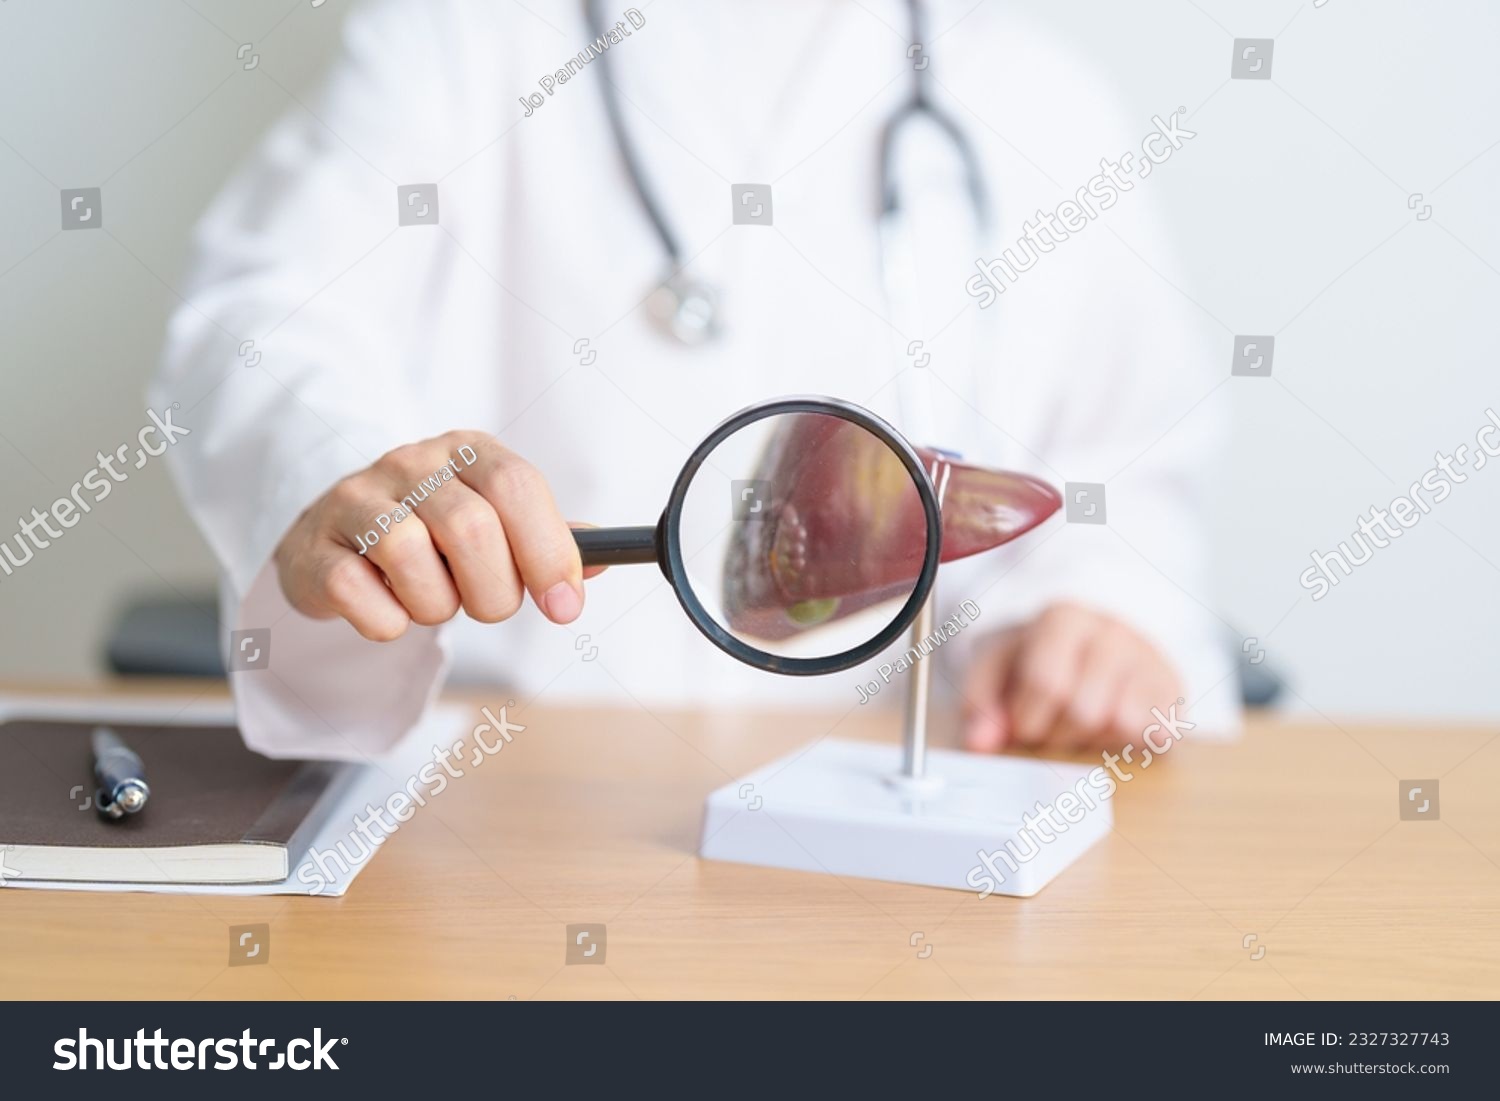 Doctor with human Liver model and Magnifying glass. Liver cancer and Tumor, Jaundice, Viral Hepatitis A, B, C, D, E, Cirrhosis, Failure, Enlarged, Hepatic Encephalopathy and Ascites Fluid in Belly #2327327743